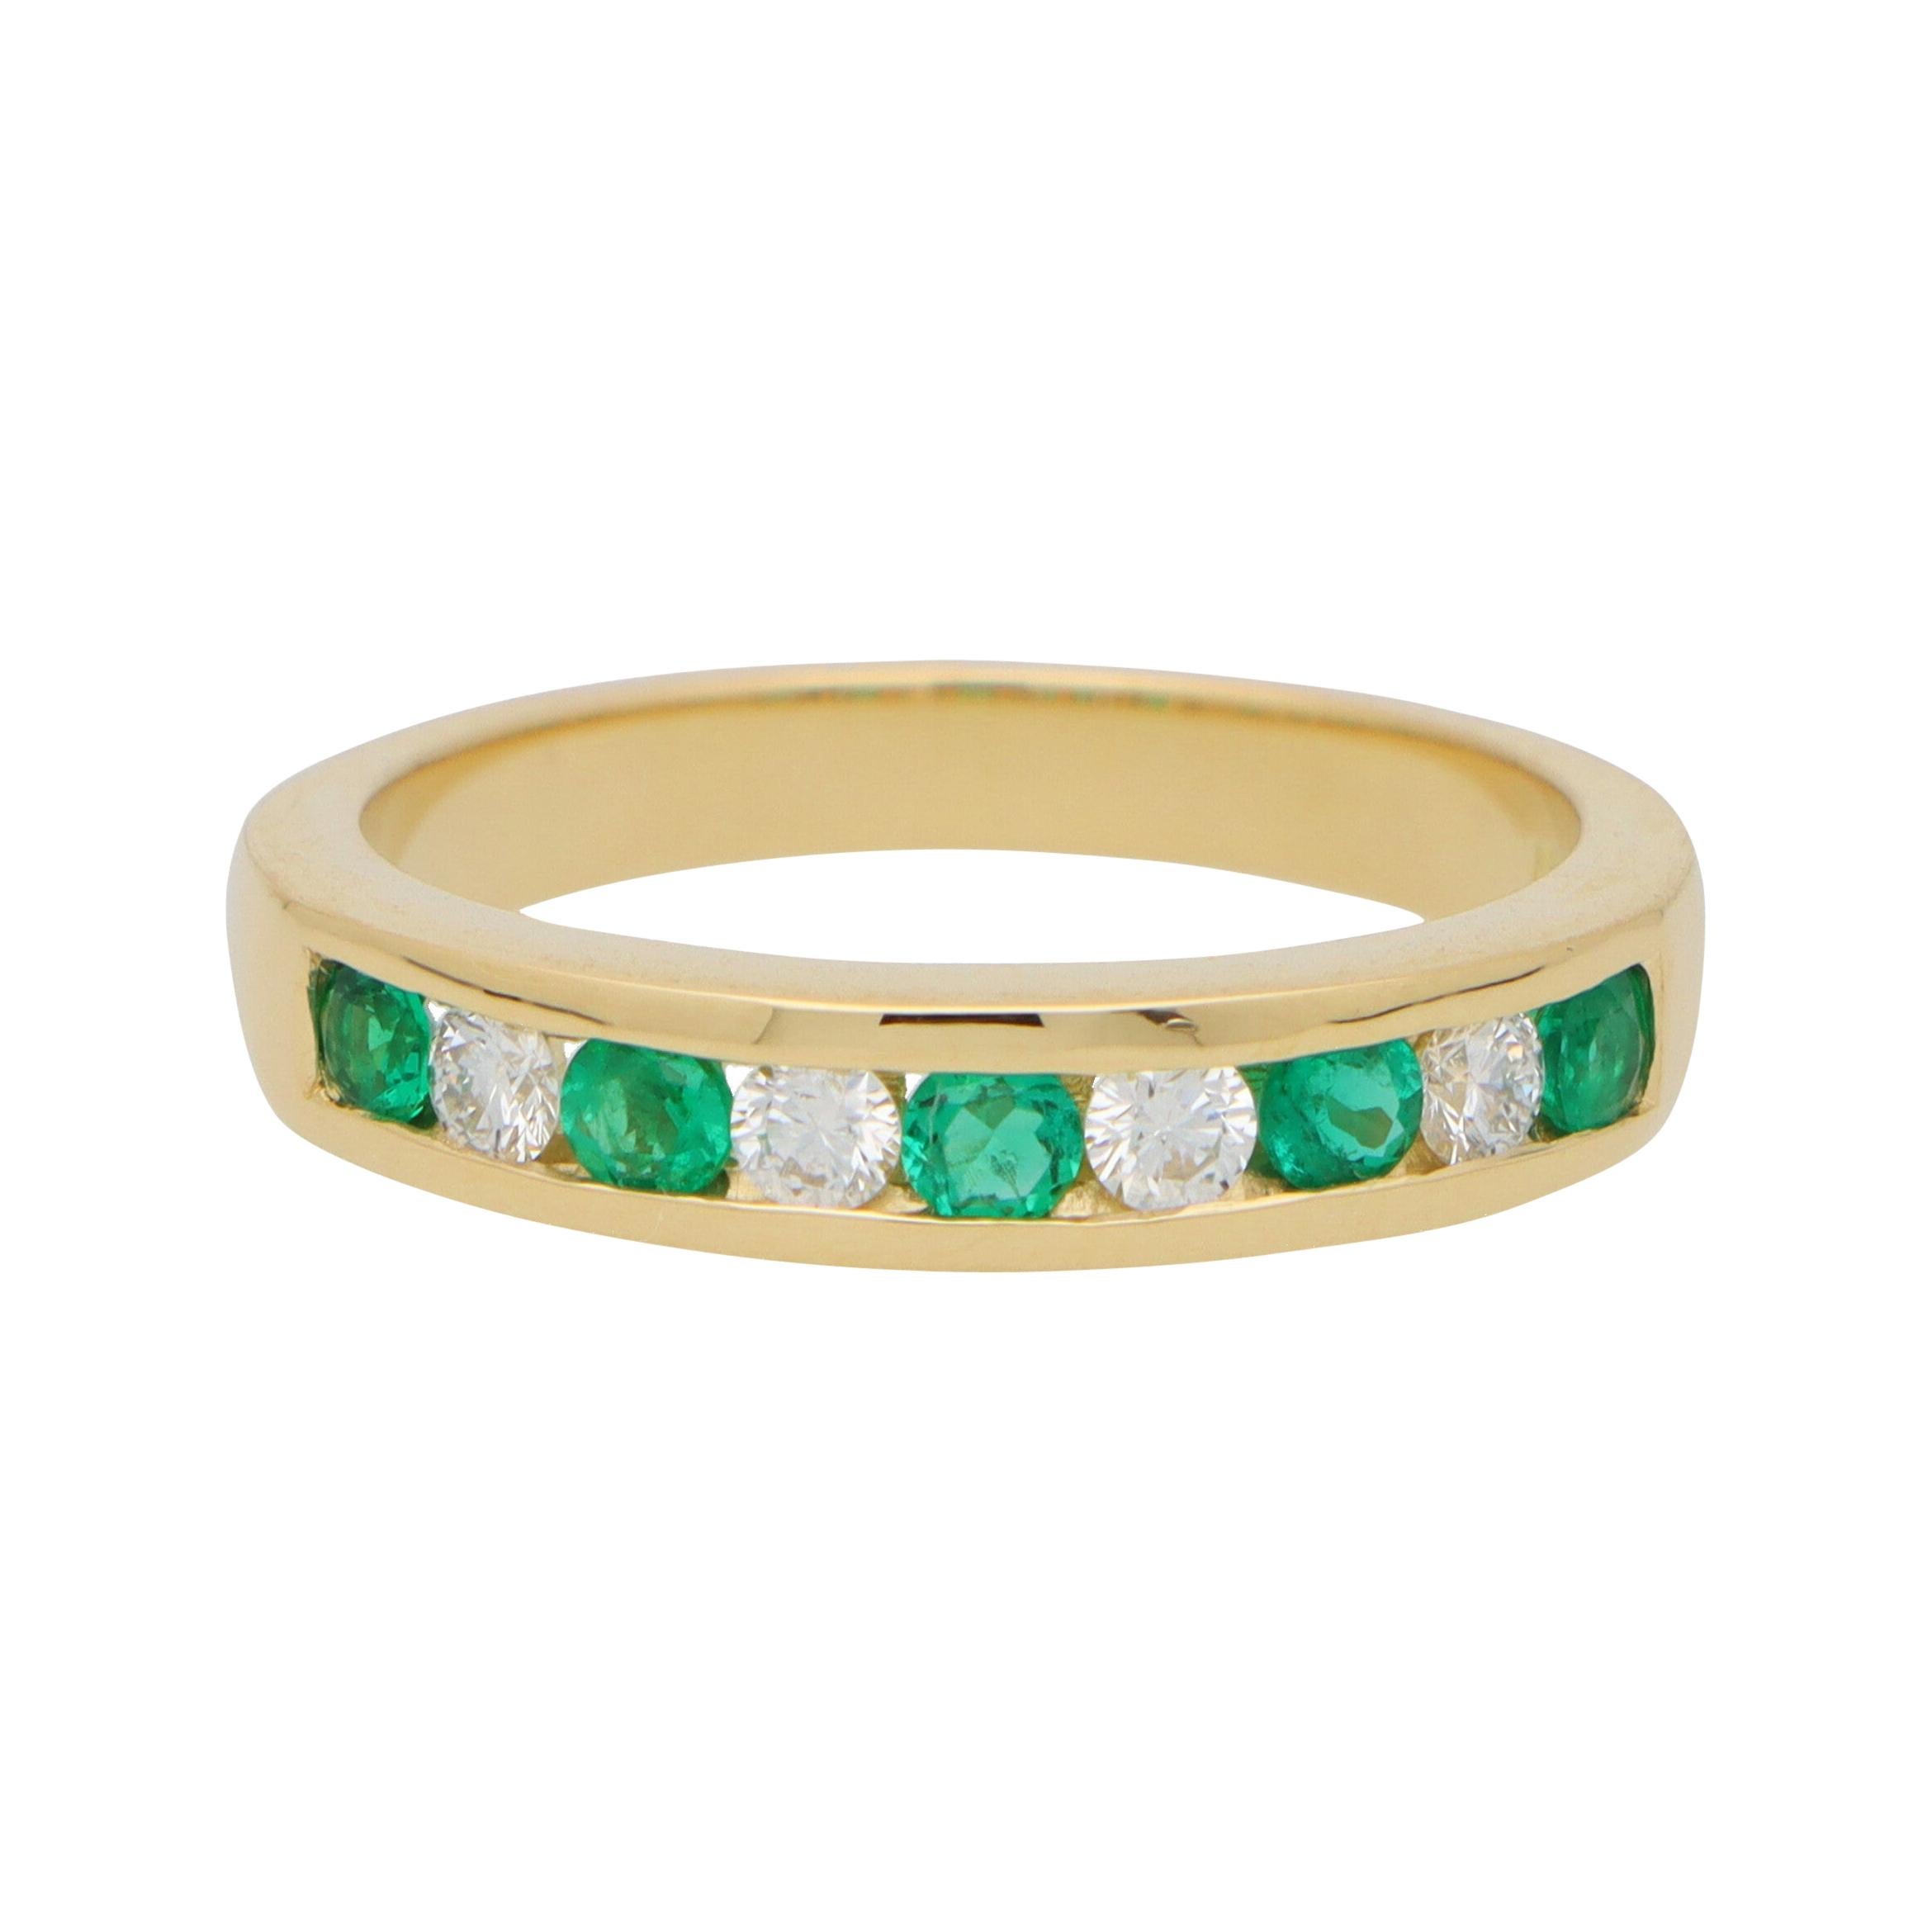 Emerald and Diamond Half Eternity Band Ring Set in 18k Yellow Gold 